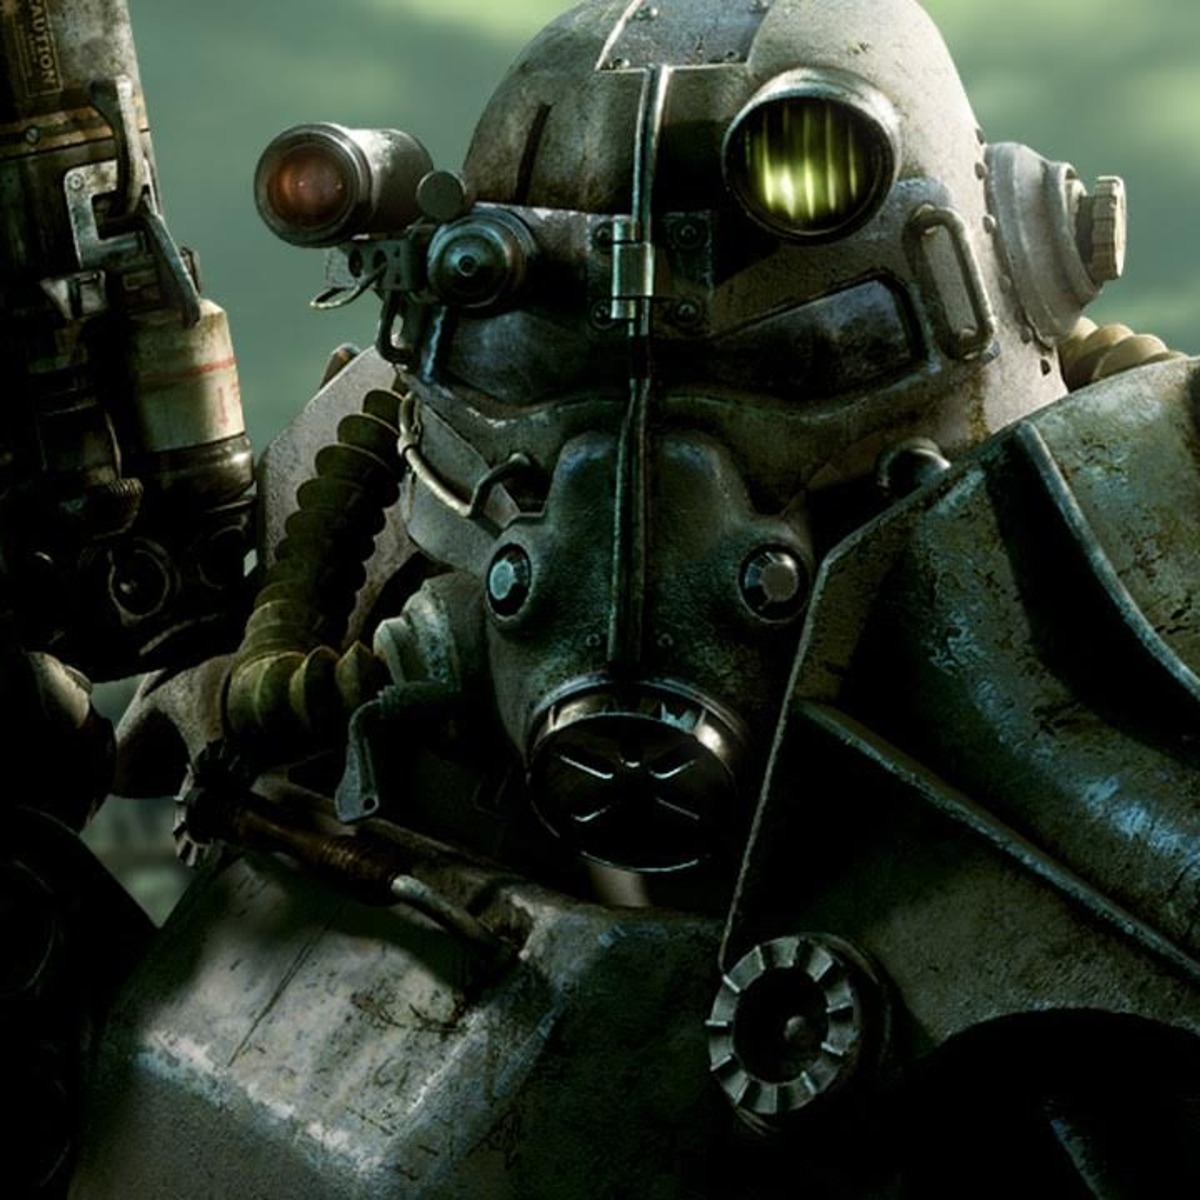 Ambitious Fallout 3 remake canceled, as modders anticipate legal action -  Polygon